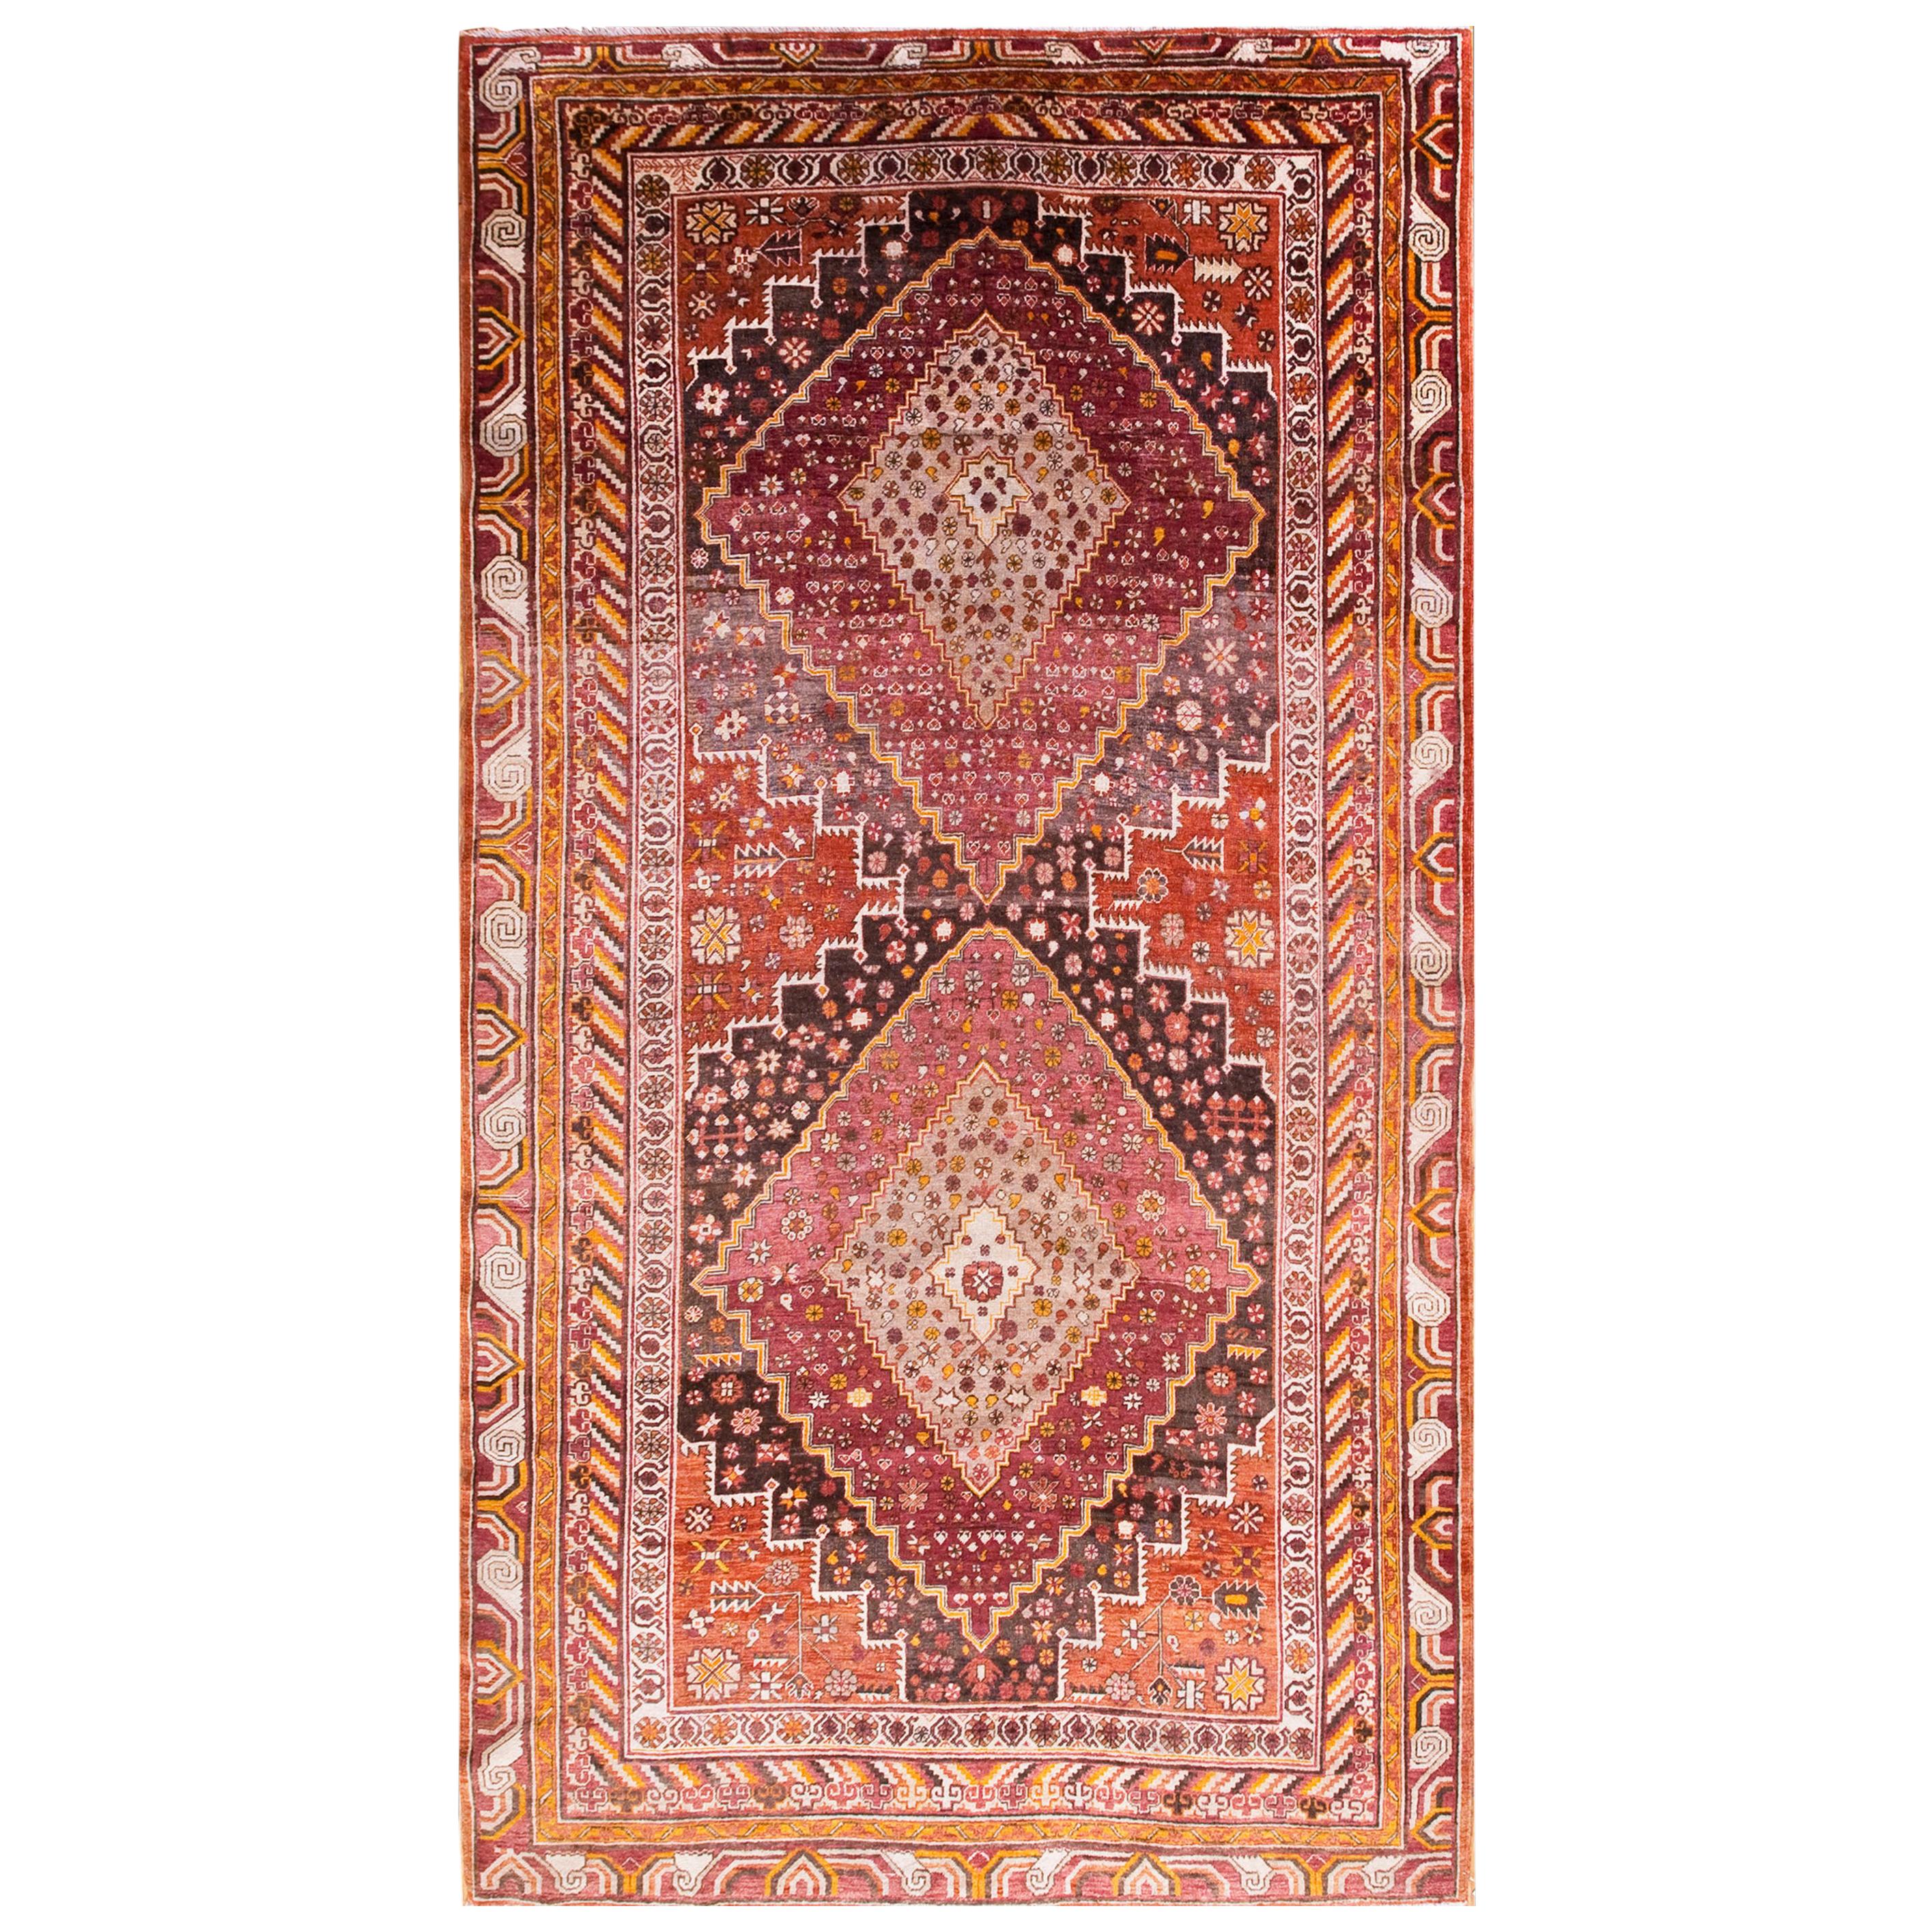 Early 20th Century Central Asian Khotan Carpet ( 7' x 13'4" - 213 x 406 ) For Sale